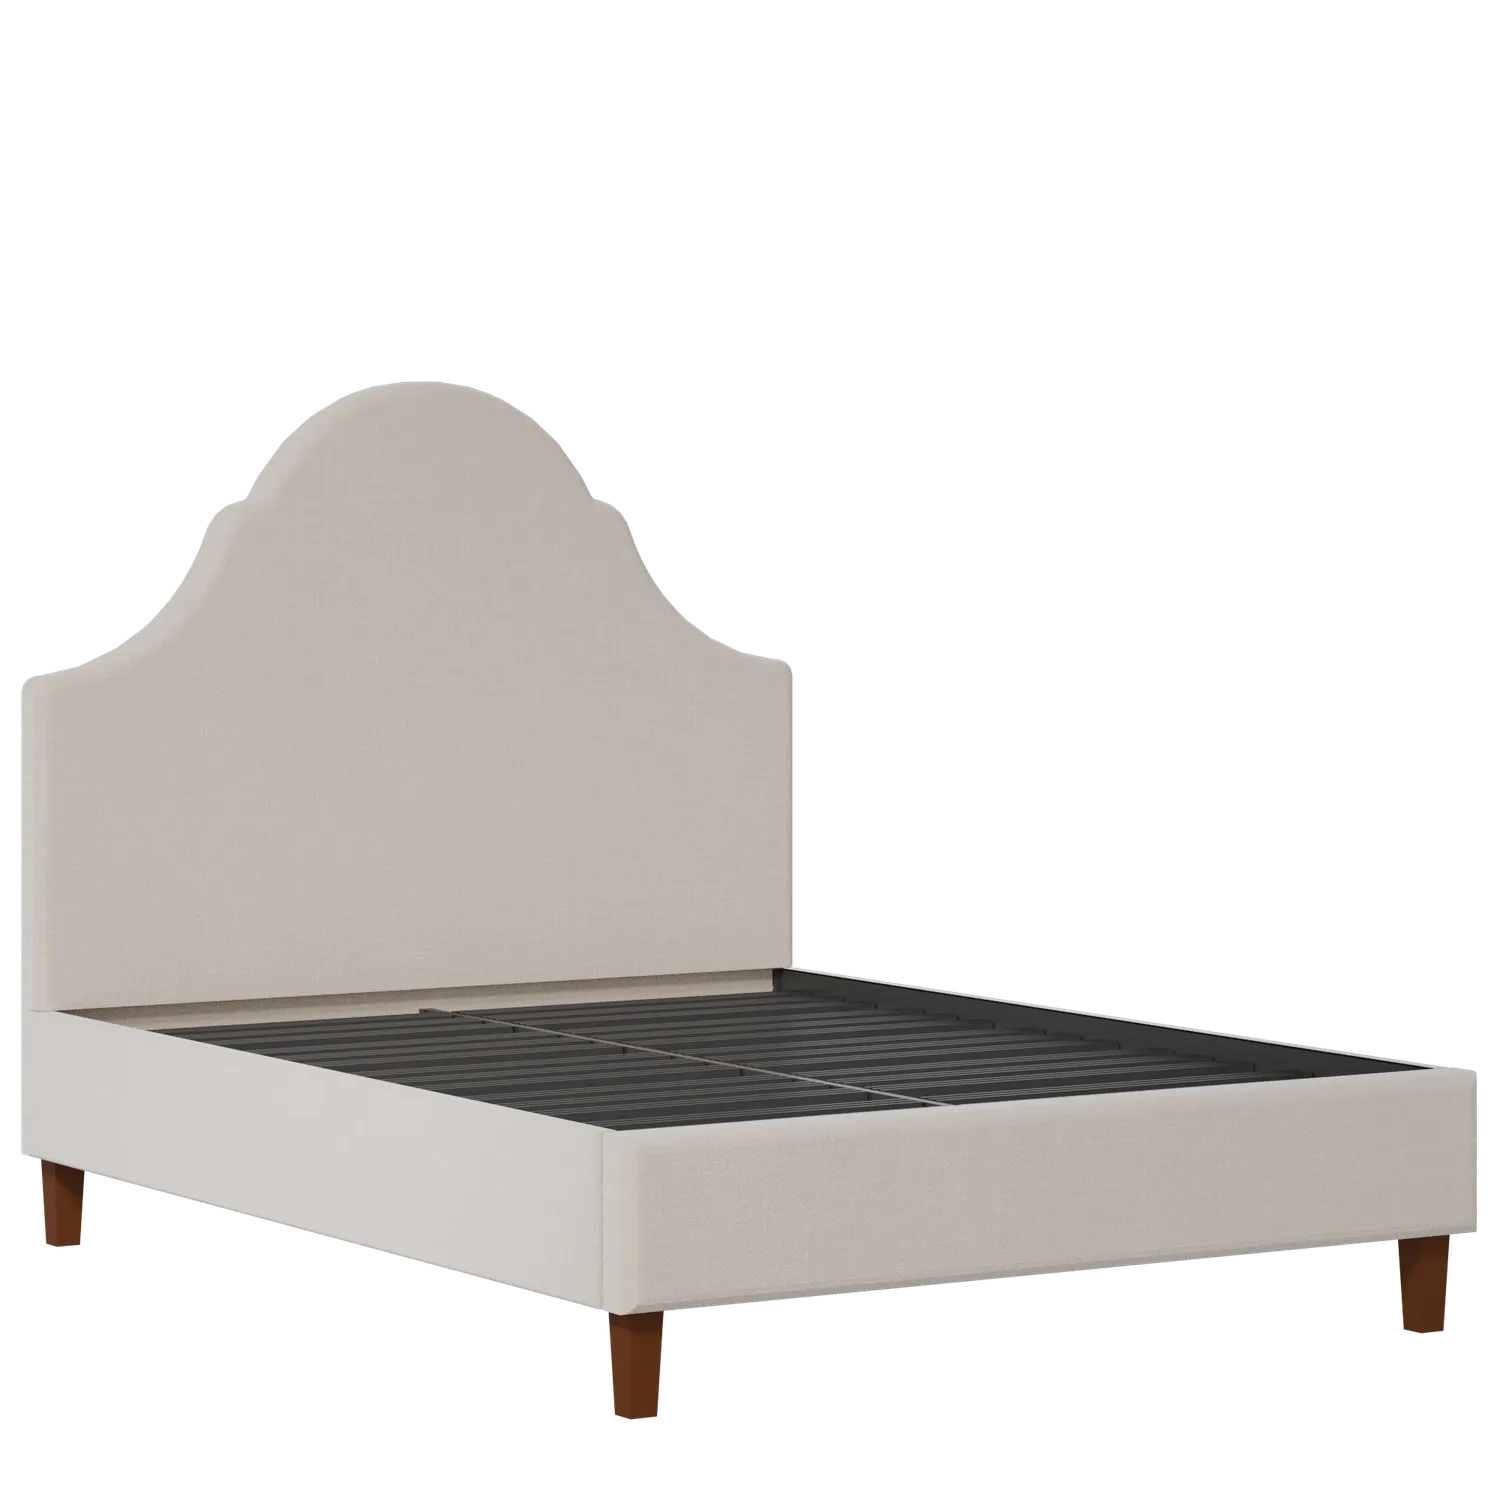 Irvine upholstered bed in silver fabric